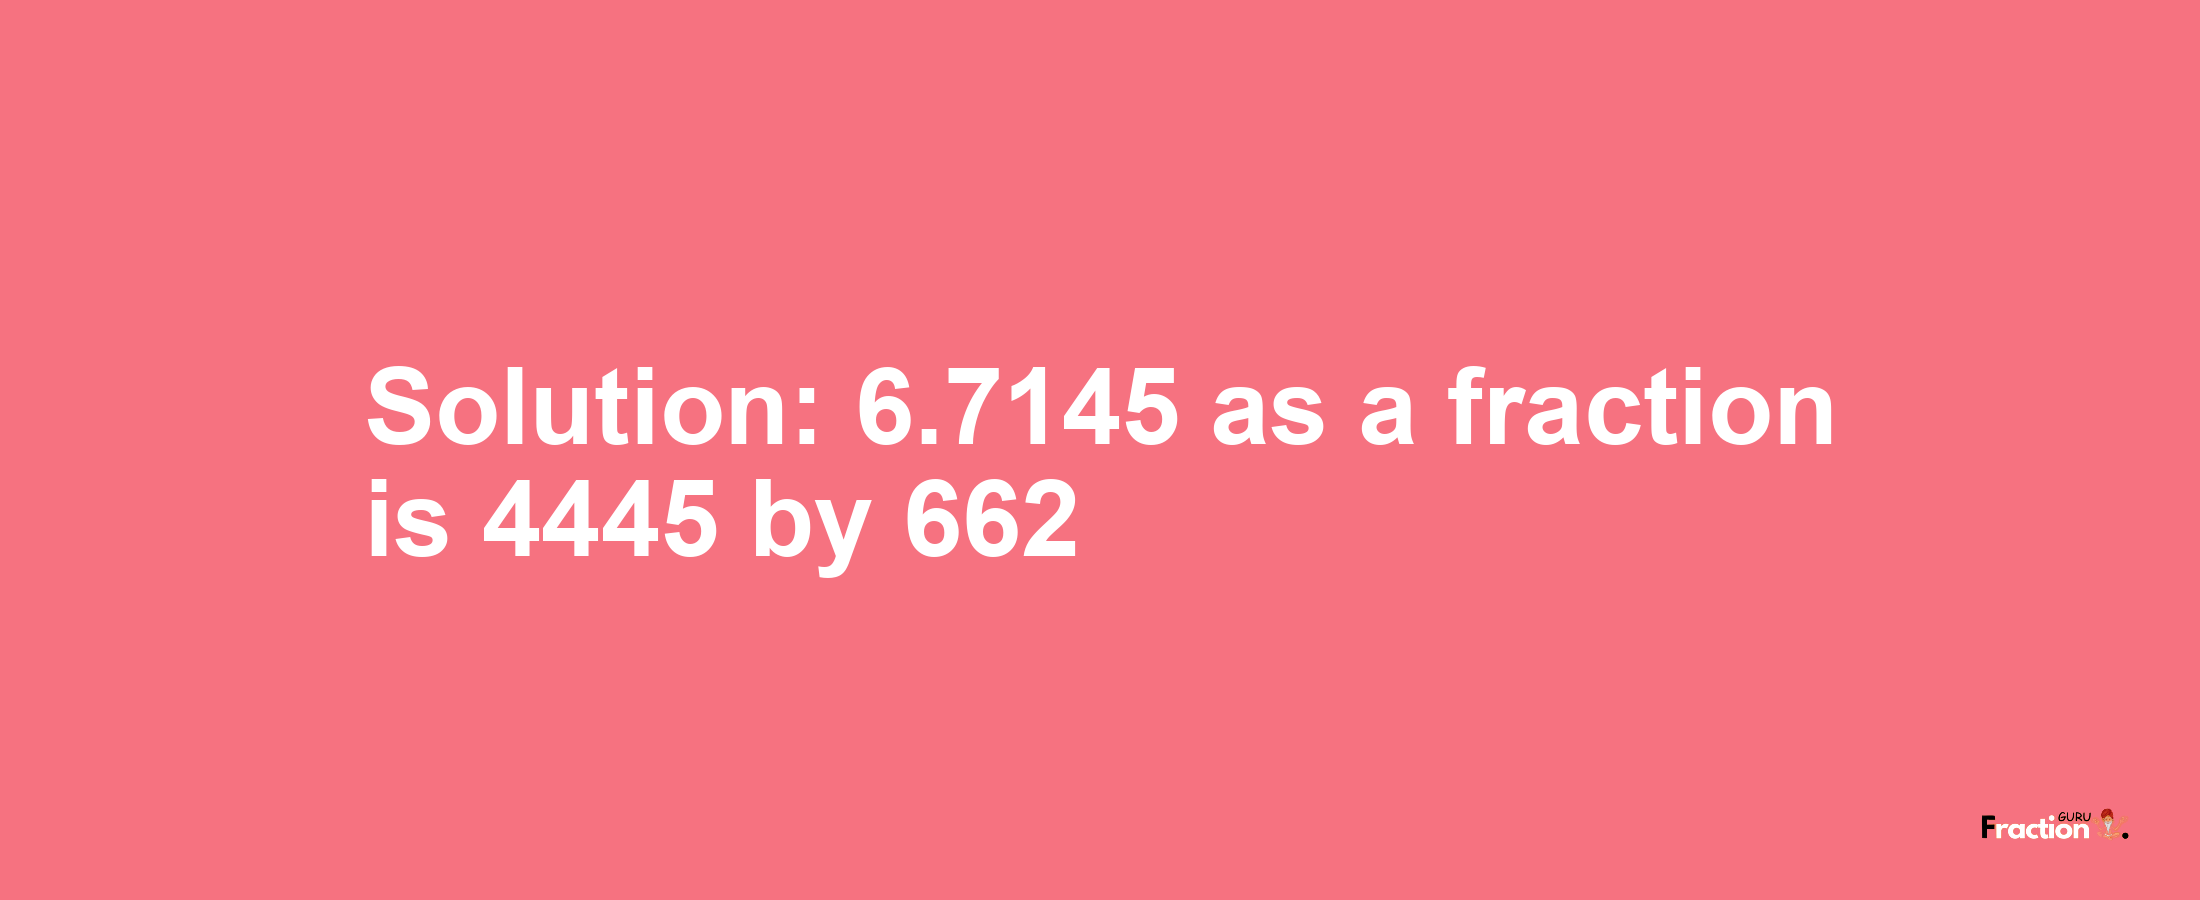 Solution:6.7145 as a fraction is 4445/662